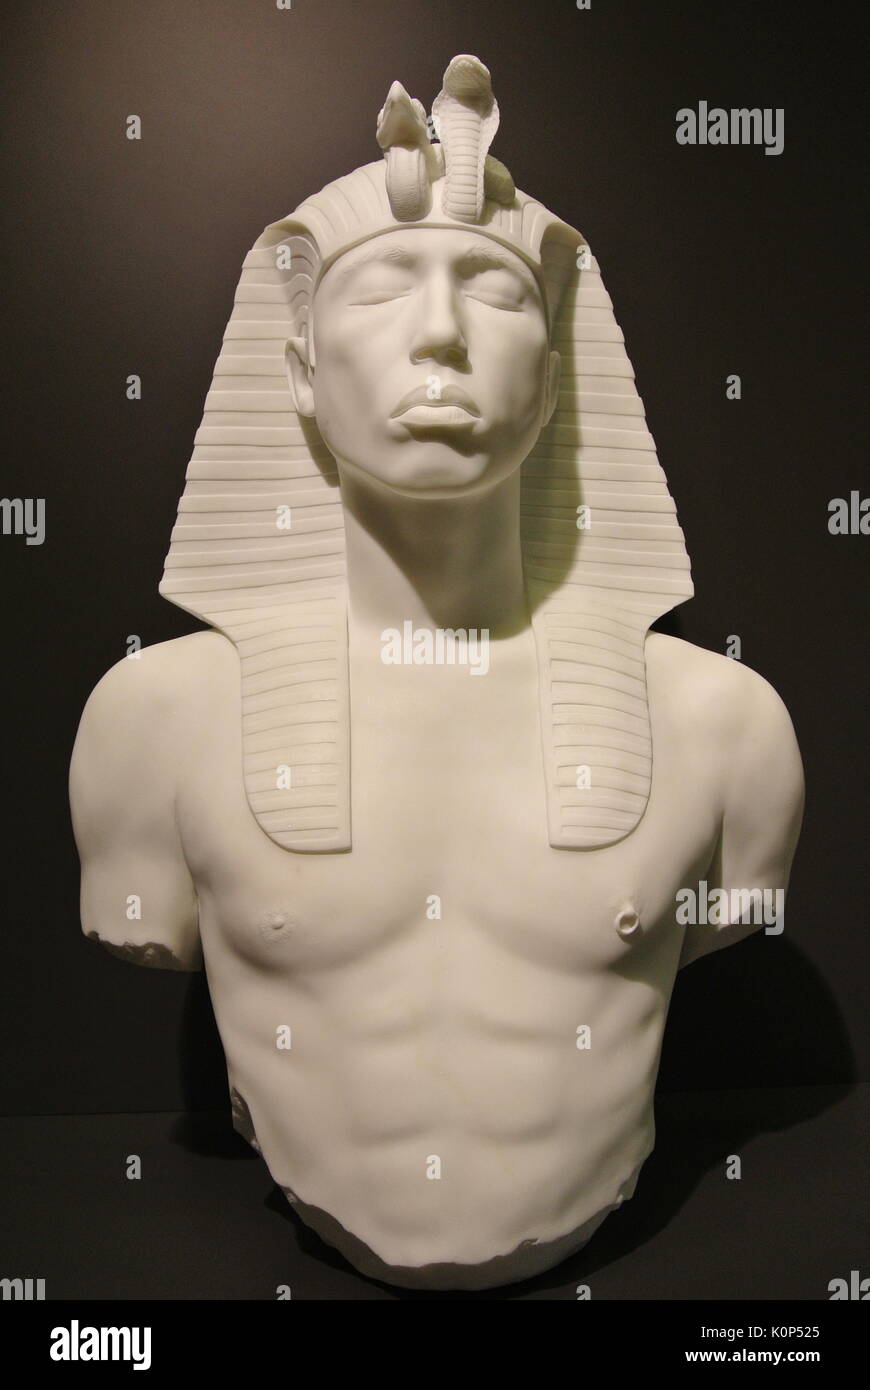 Damien Hirst's Pharaoh, who takes his looks from Pharell Williams, displayed at the Punta Della Dogana during Venice Biennial 2017. Stock Photo